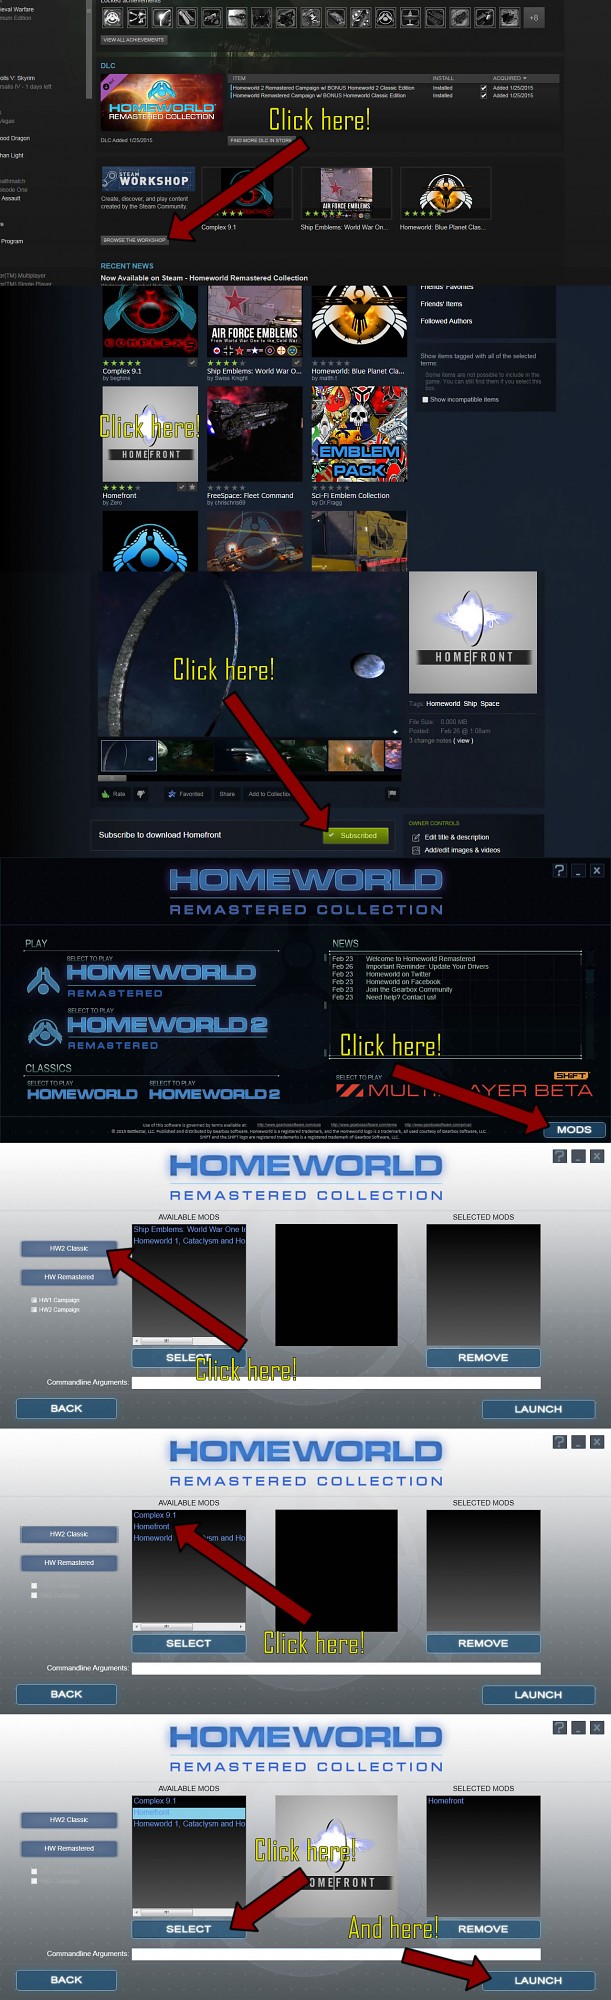 how to download a mod from the steam workshop